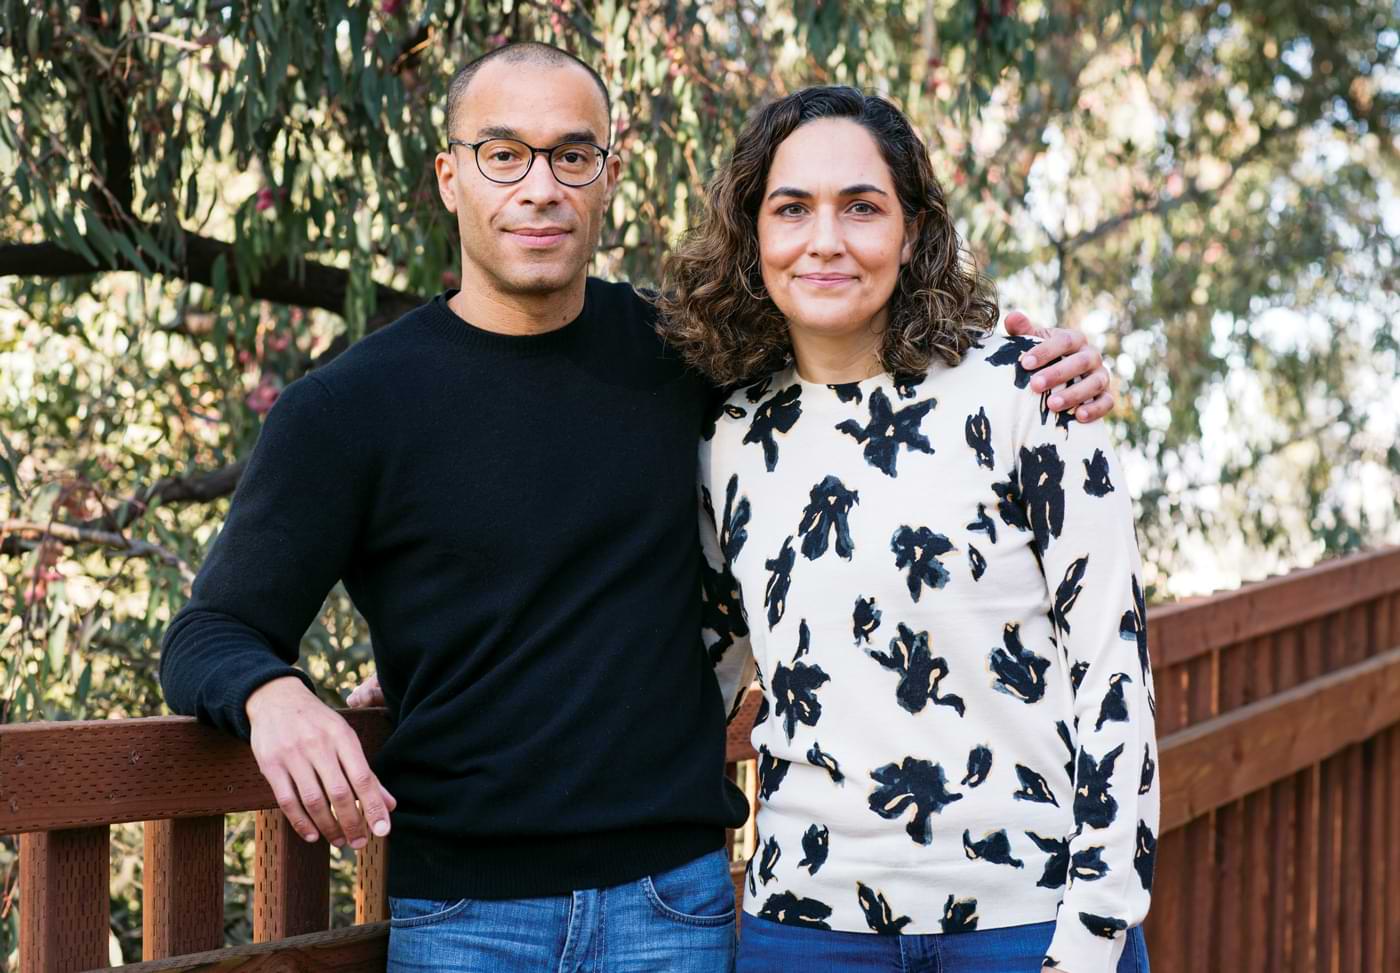 Professors Jonathan Glater and Jennifer Chacón join Berkeley Law’s faculty from UCLA School of Law. Photo by Trish Alison Photography